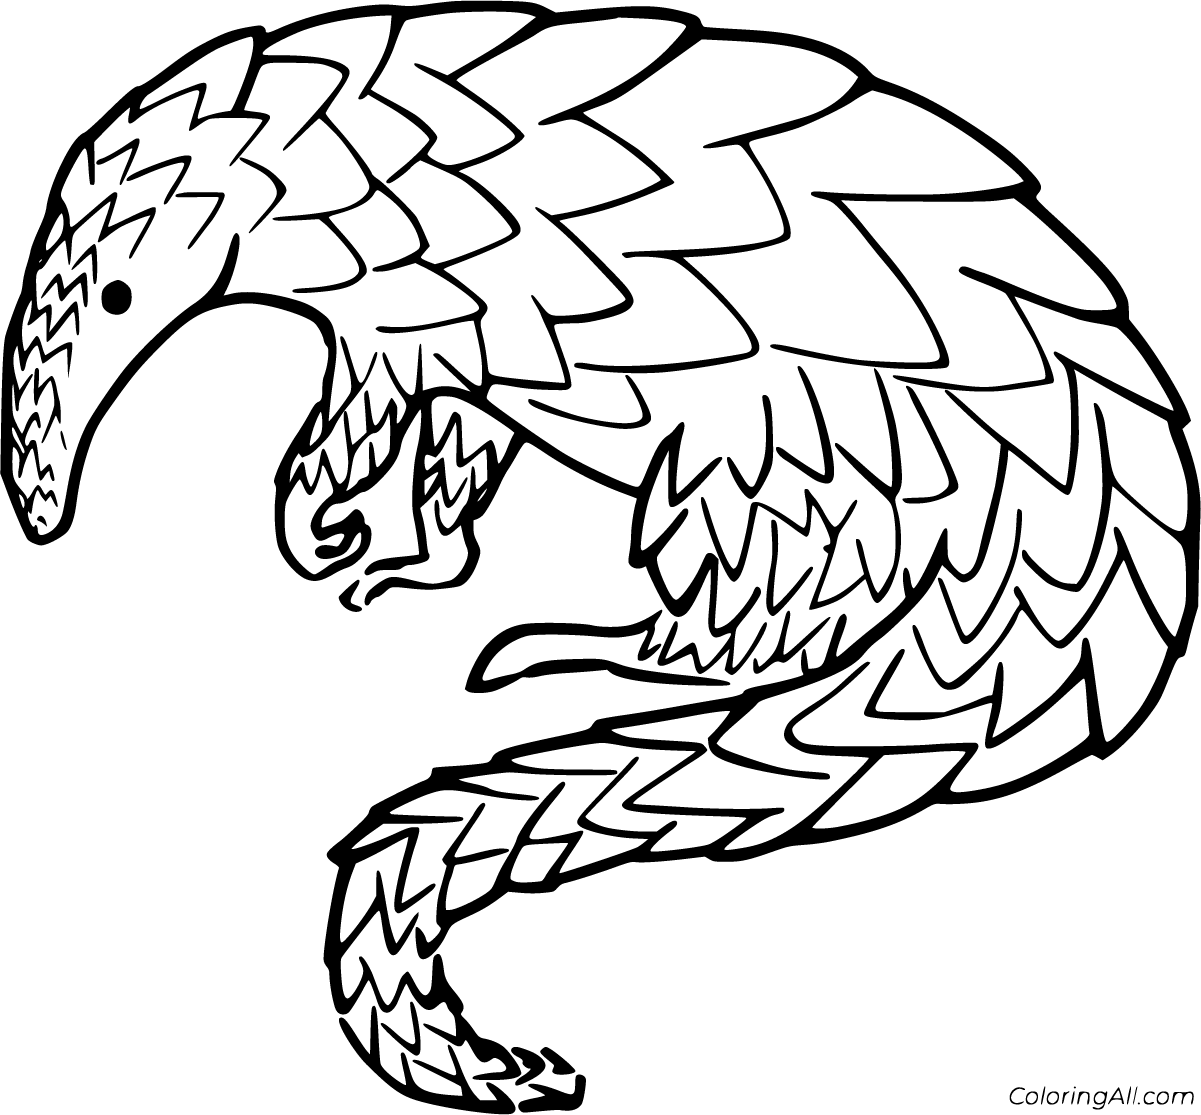 Download Pangolin Coloring Pages - ColoringAll